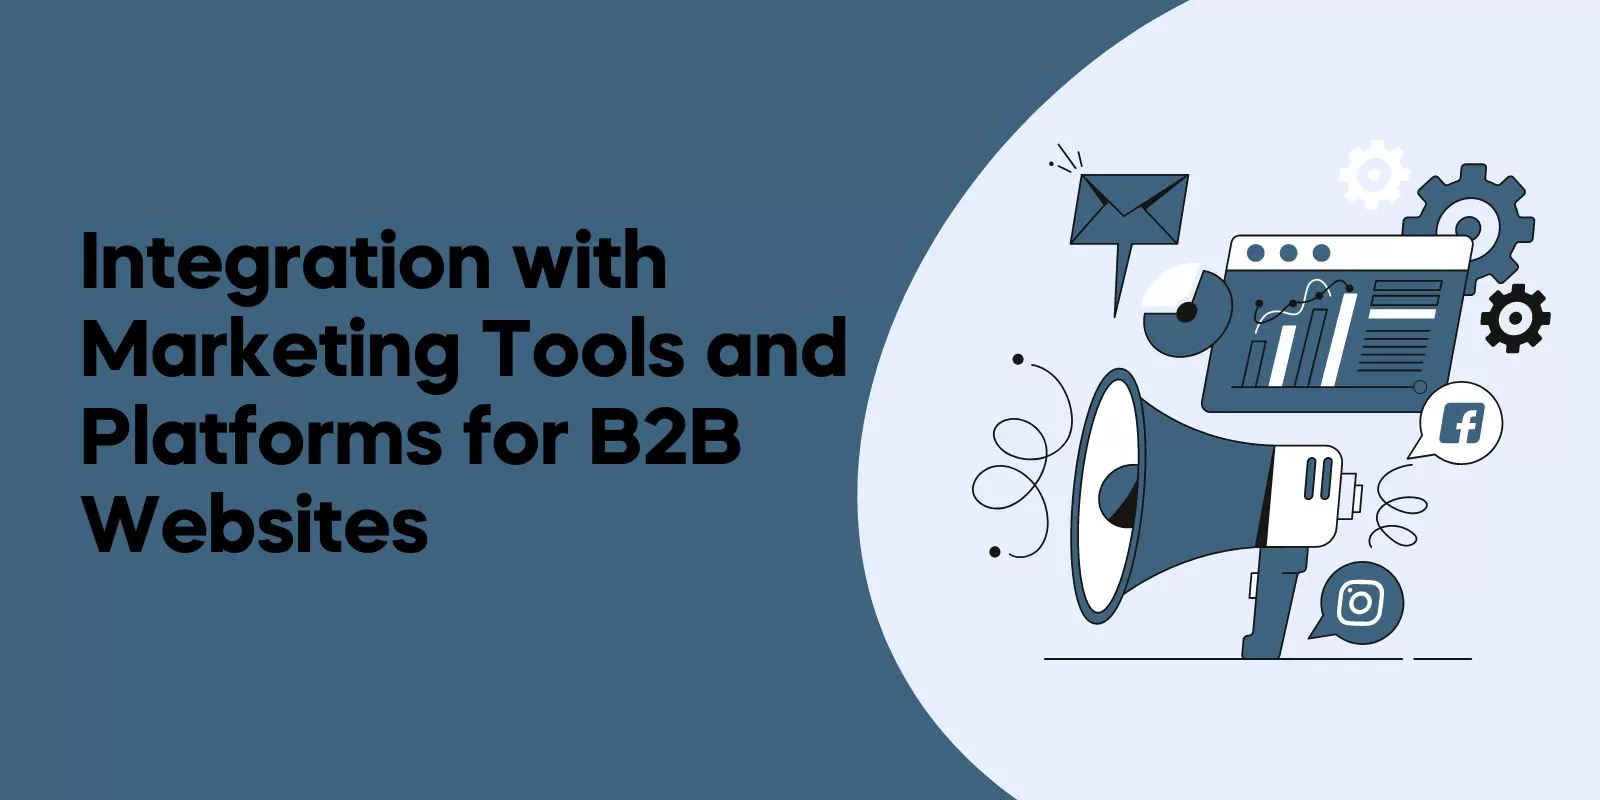 Integration with Marketing Tools and Platforms for B2B Websites